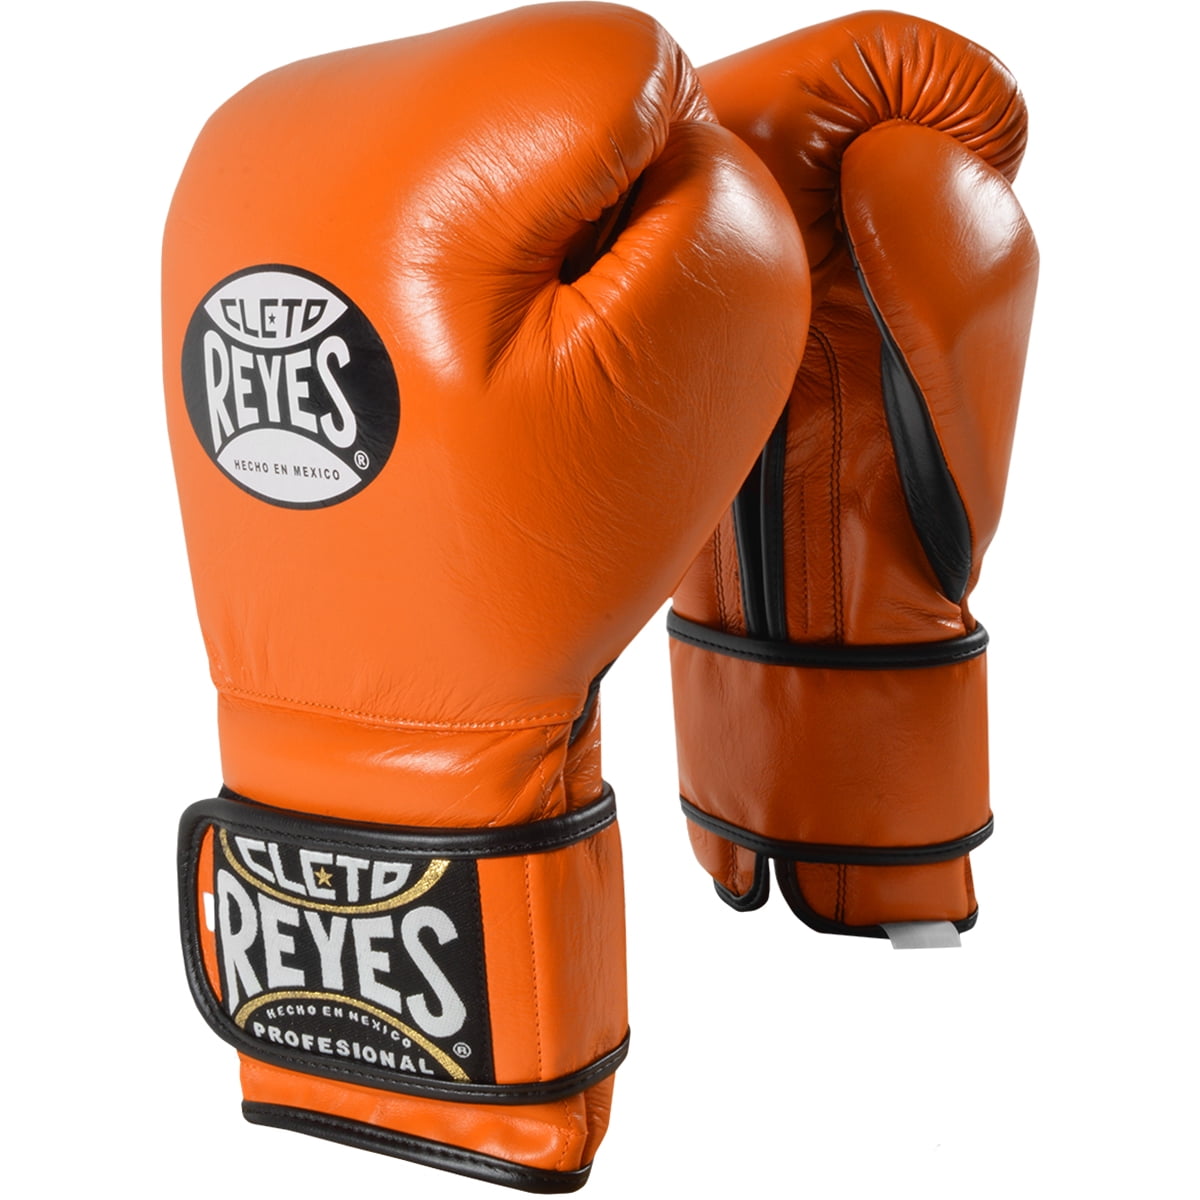 *FREE* Cleto Reyes Boxing Gloves Wrap Around Sparring Silver Training Leather 